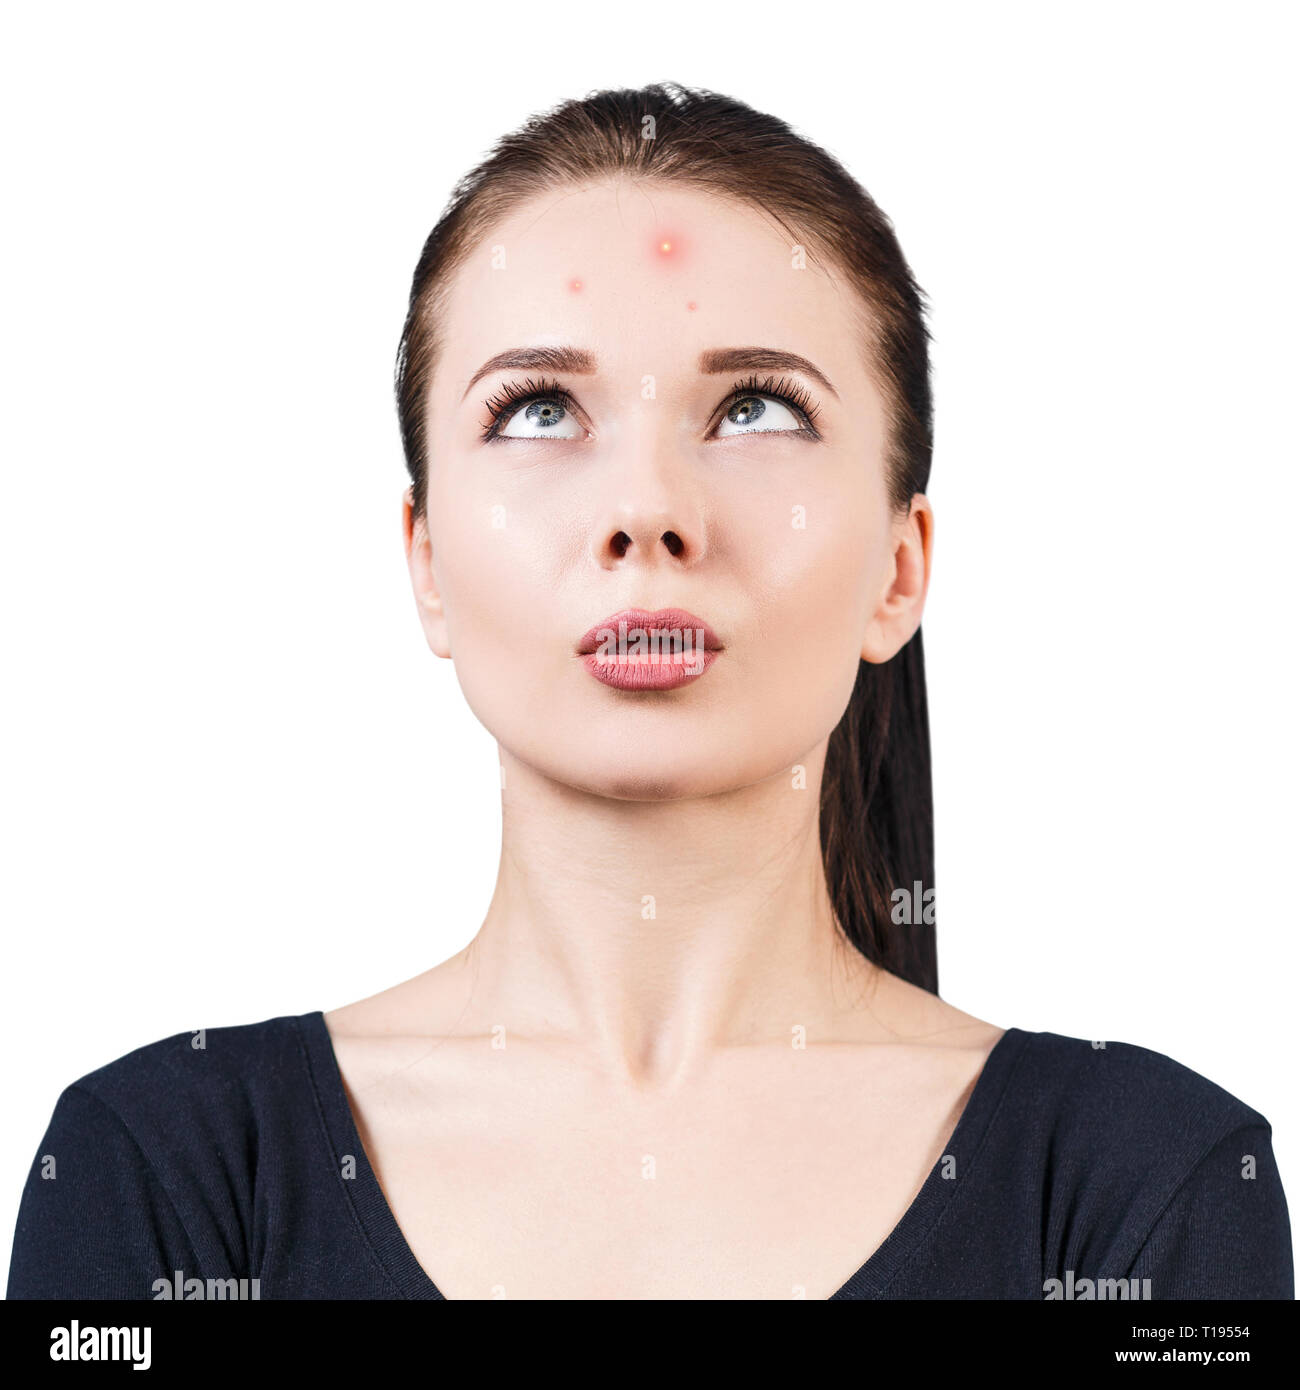 Woman with pimple on face Stock Photo - Alamy